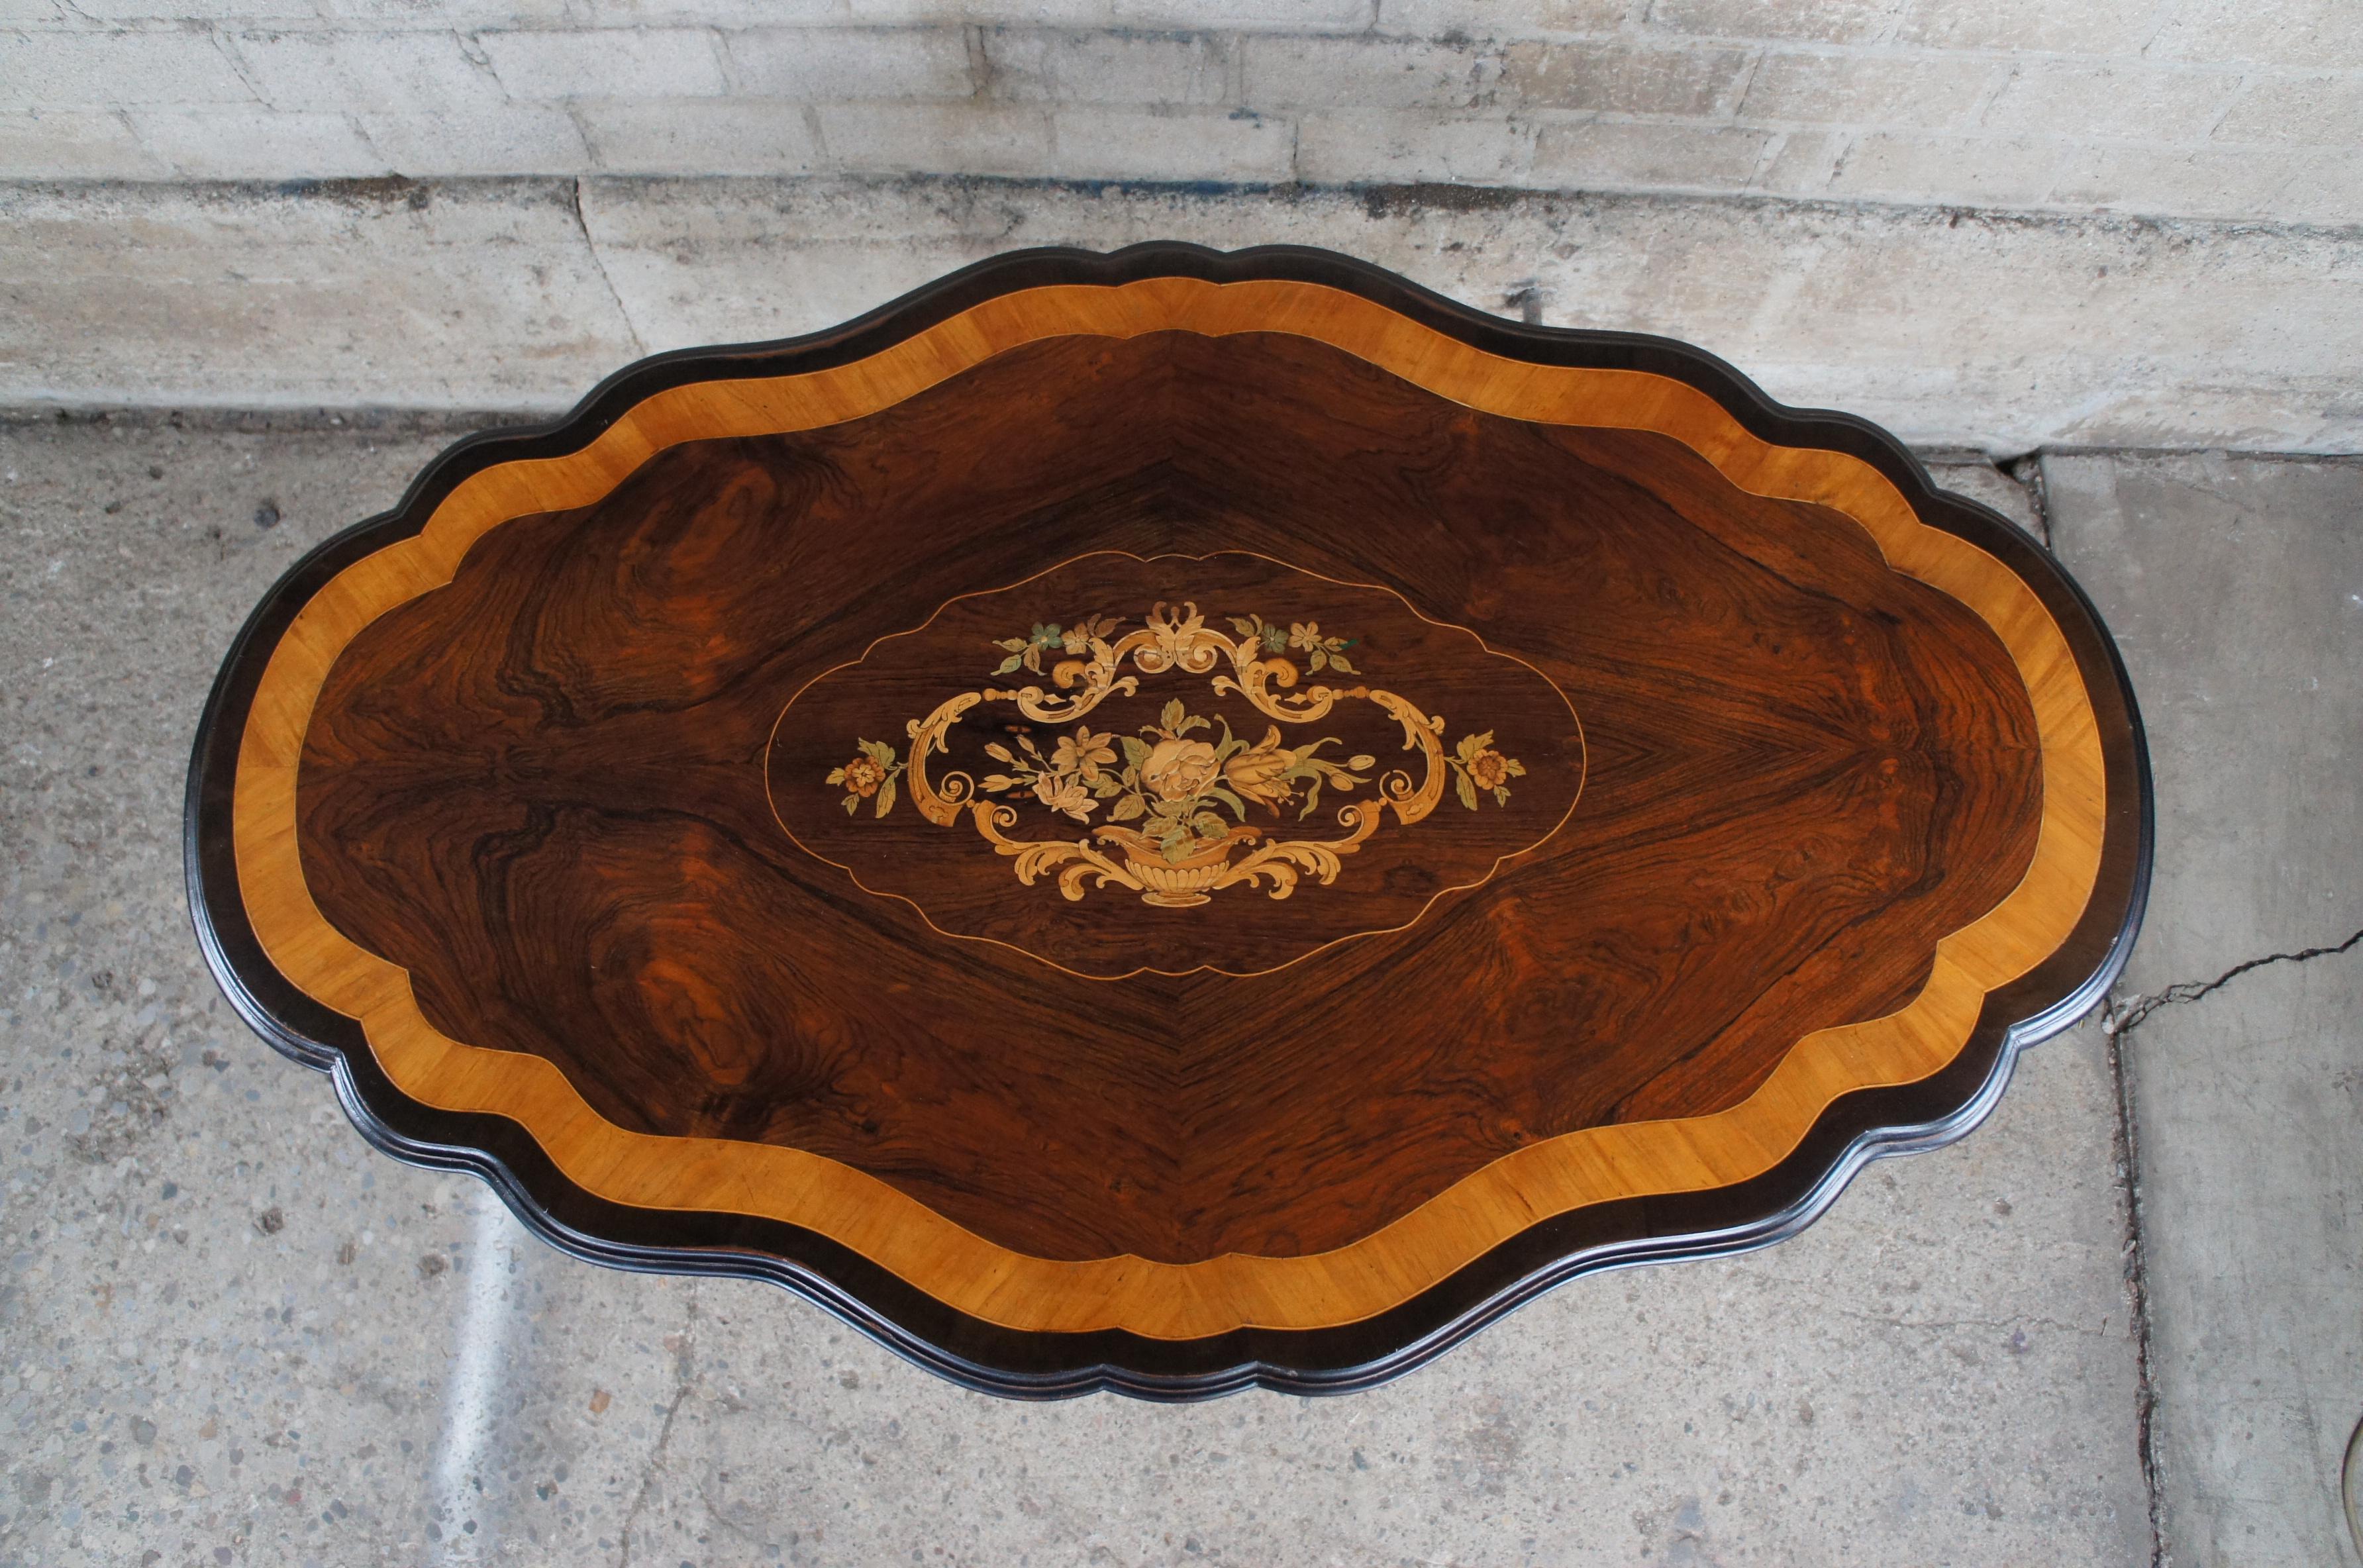 Antique American Renaissance Revival Serpentine Walnut Marquetry Center Table For Sale 1